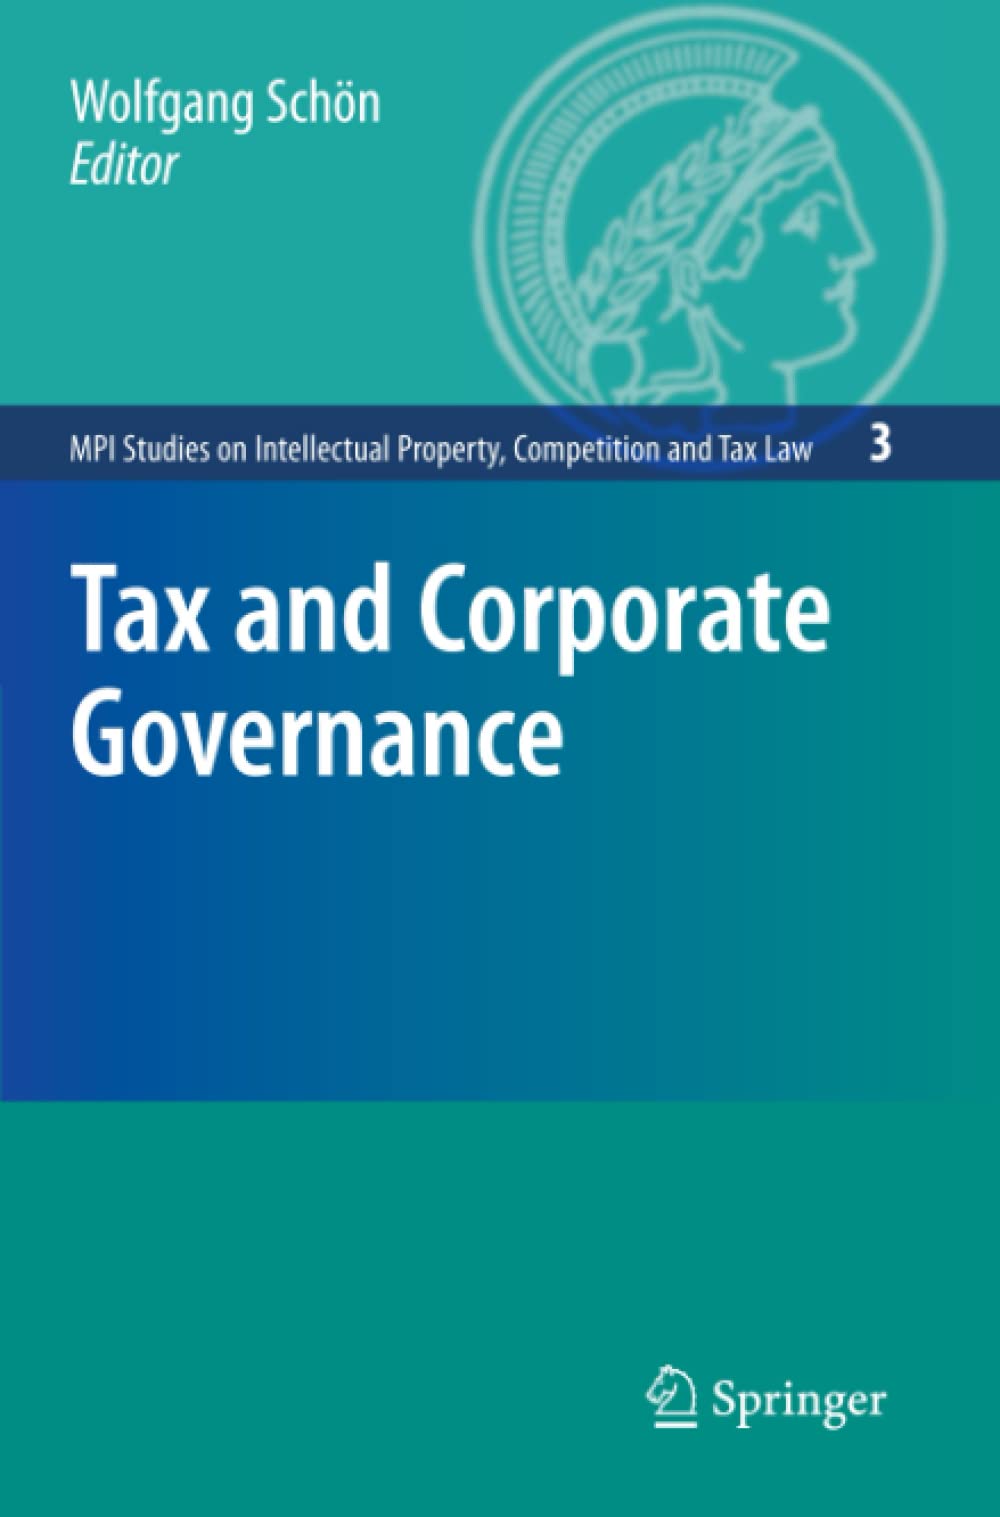 Tax and Corporate Governance (MPI Studies on Intellectual Property and Competition Law, 3)